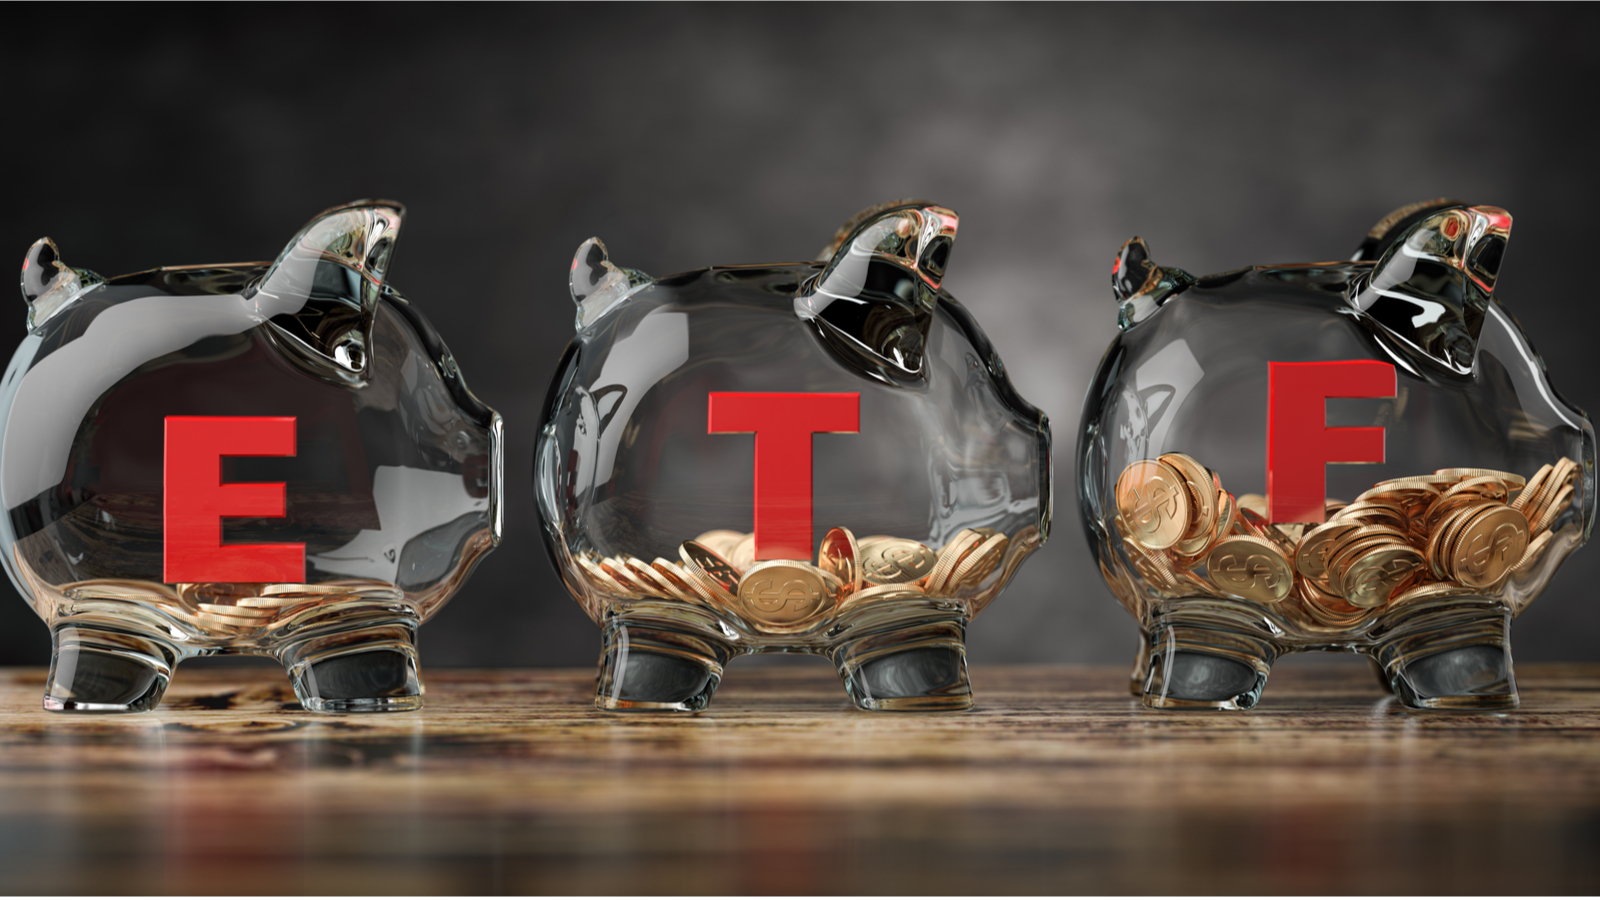 An image of three glass piggy banks with ETF written on the sides on a table.